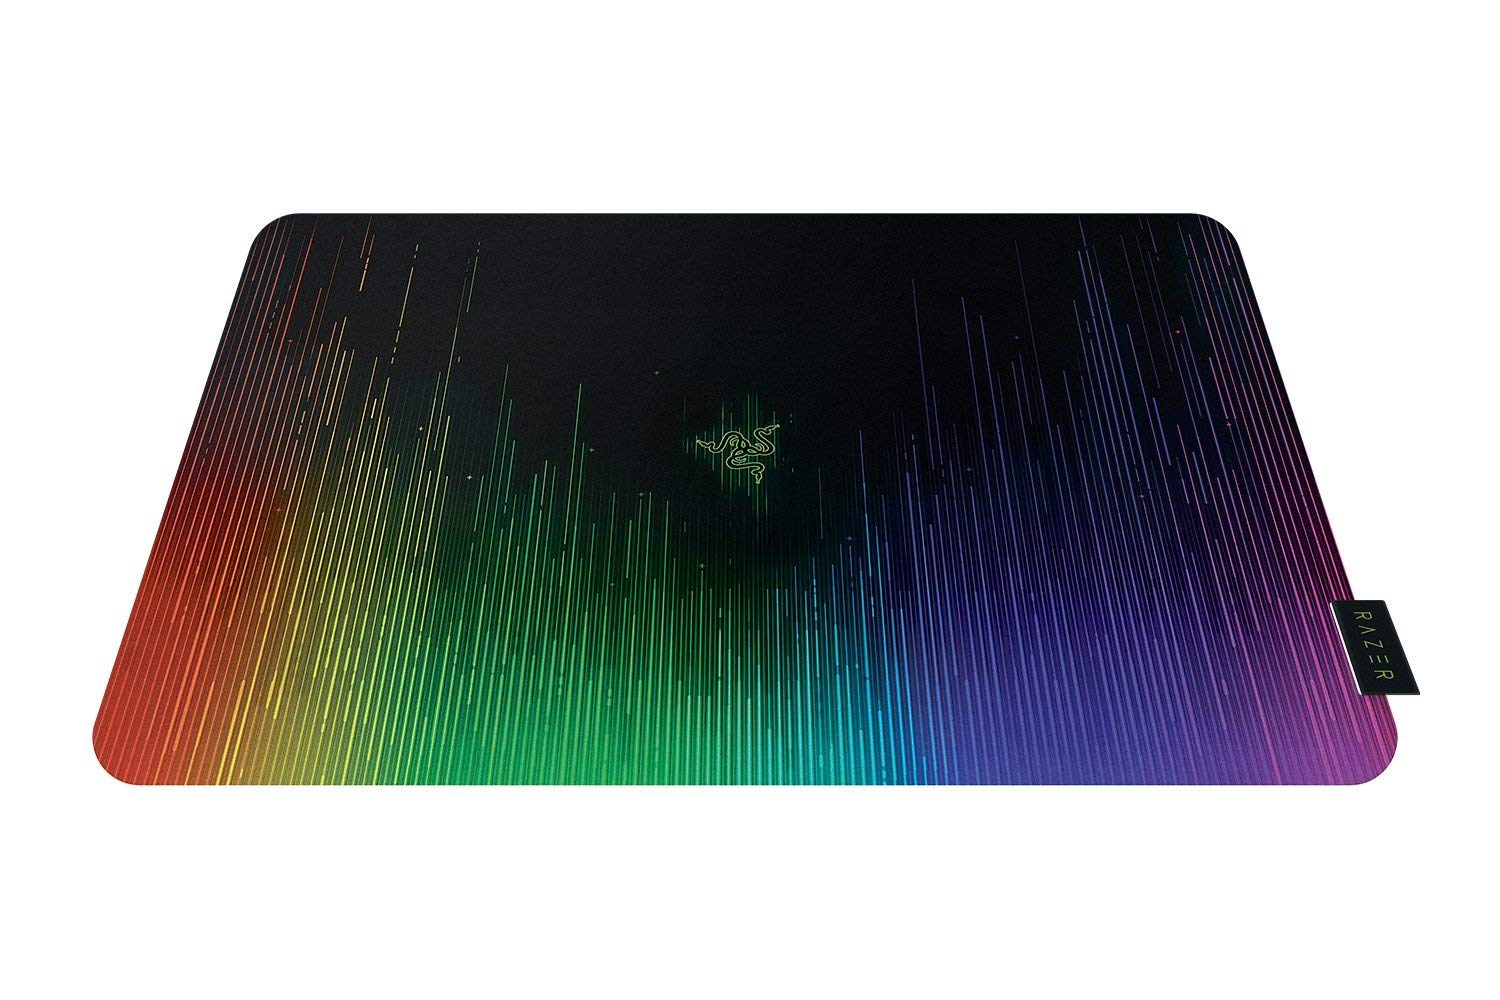 Razer Sphex V2 Ultra-Thin Form Factor - Optimized Gaming Surface - Polycarbonate Finish - Gaming Mouse Mat - image 4 of 10